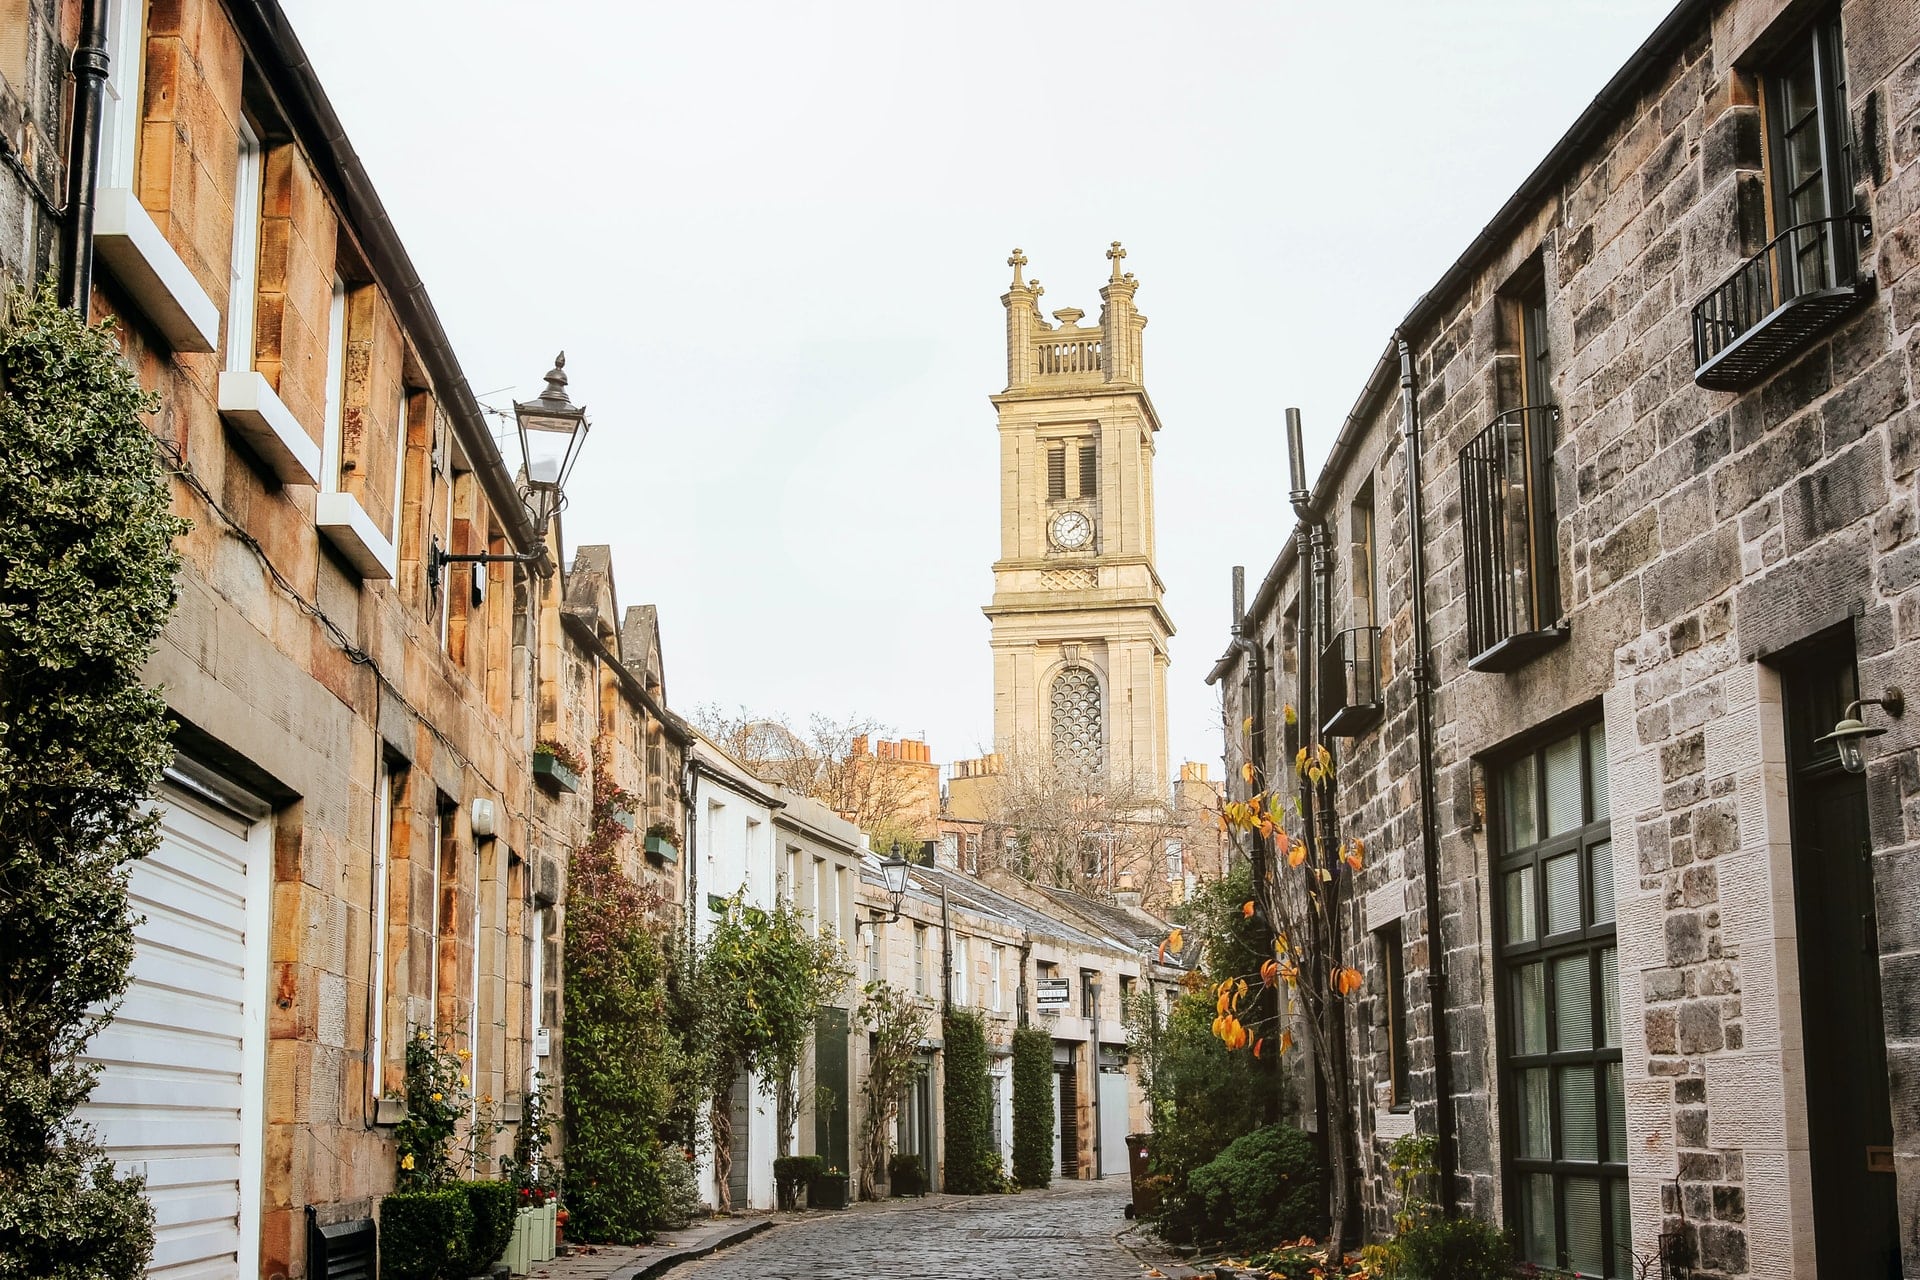 cute-lane-with-cobbled-floor-with-short-houses-on-either-side-leading-up-to-picturesque-tower-circus-lane-best-uk-city-breaks-for-couples